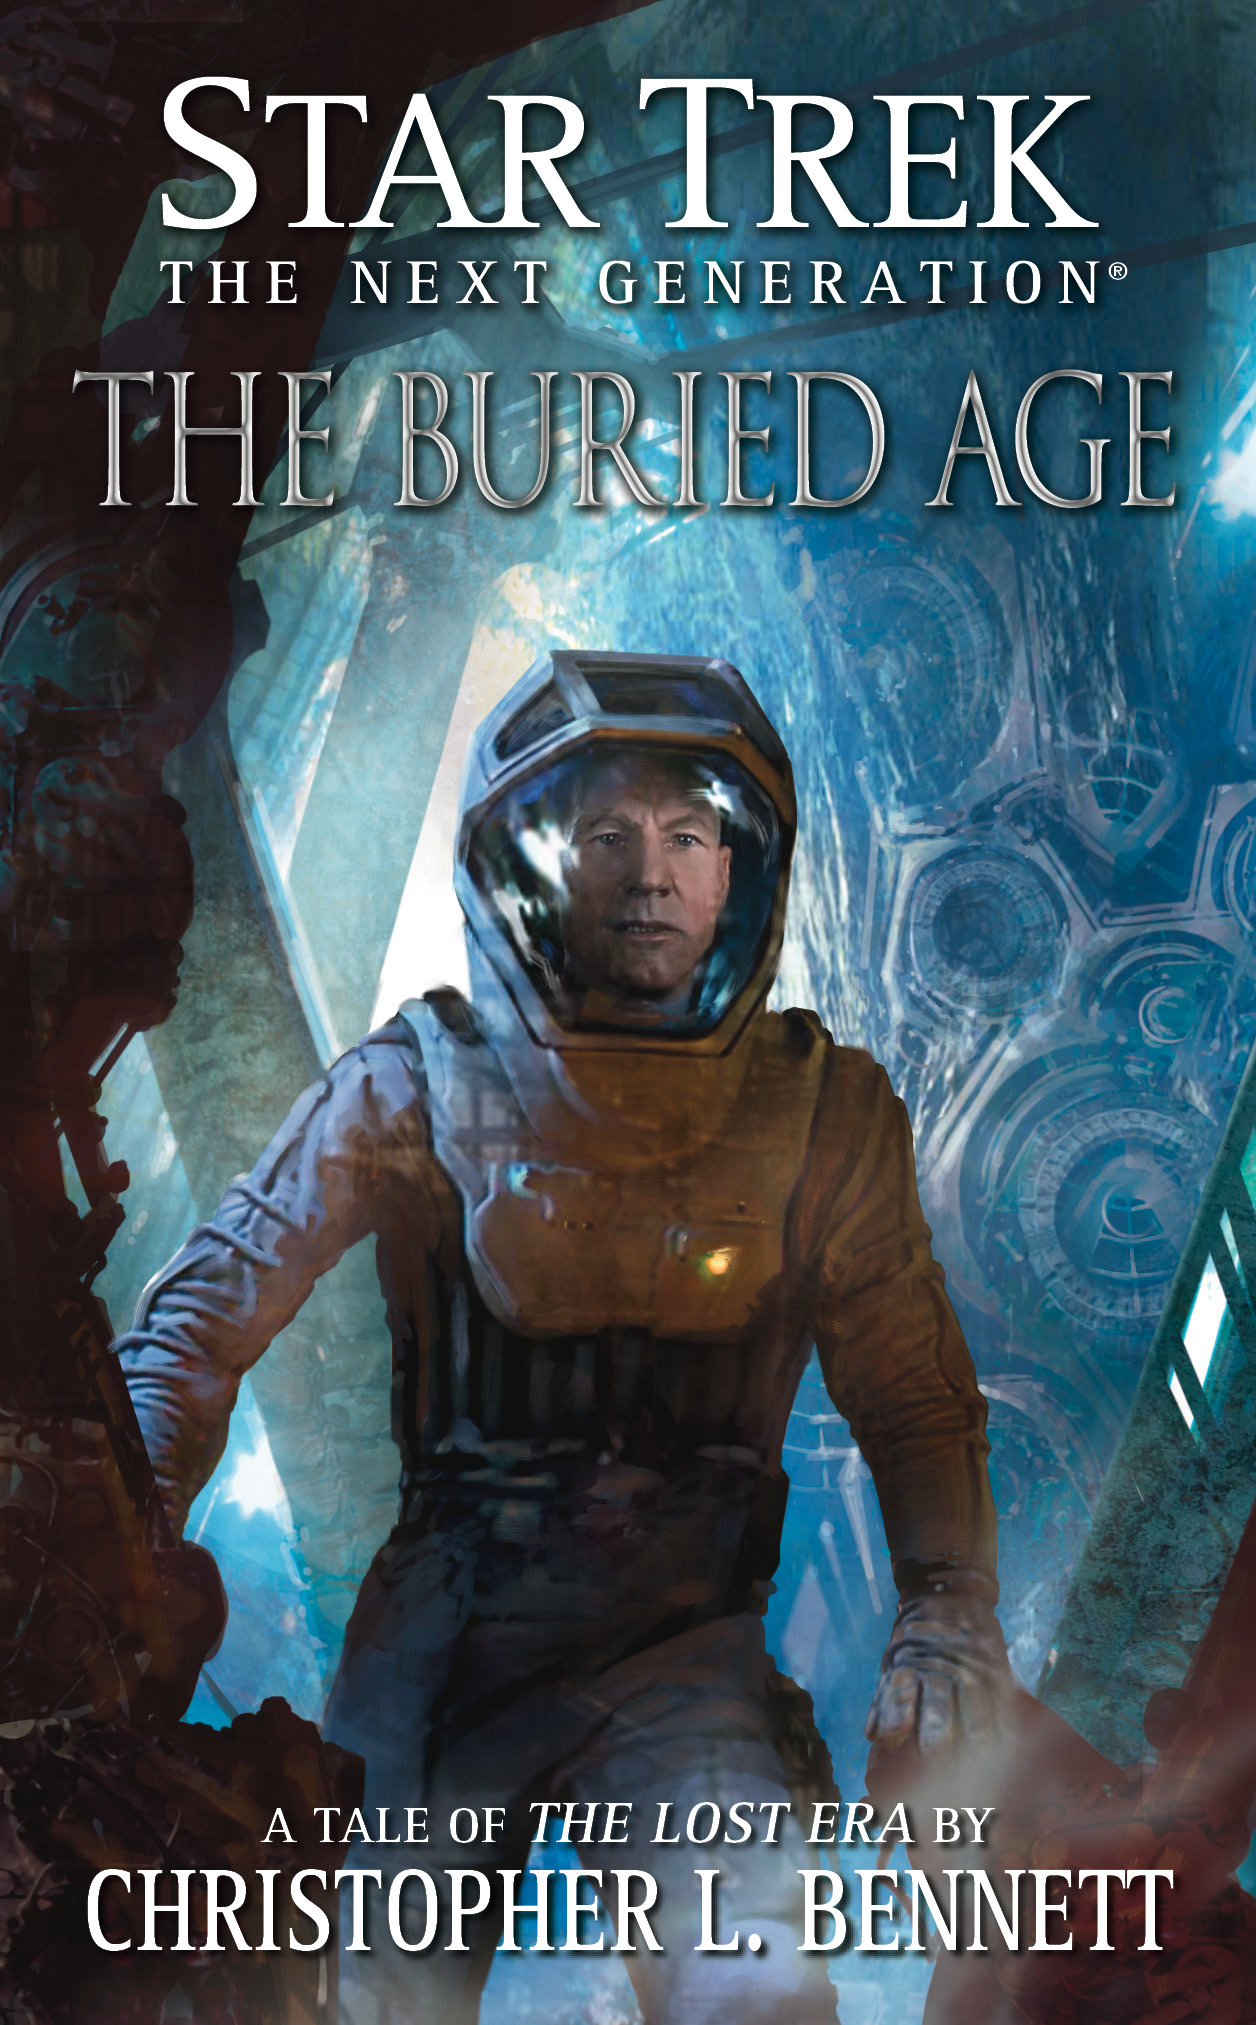 “Star Trek: The Next Generation: The Buried Age” Review by Positivelytrek.libsyn.com